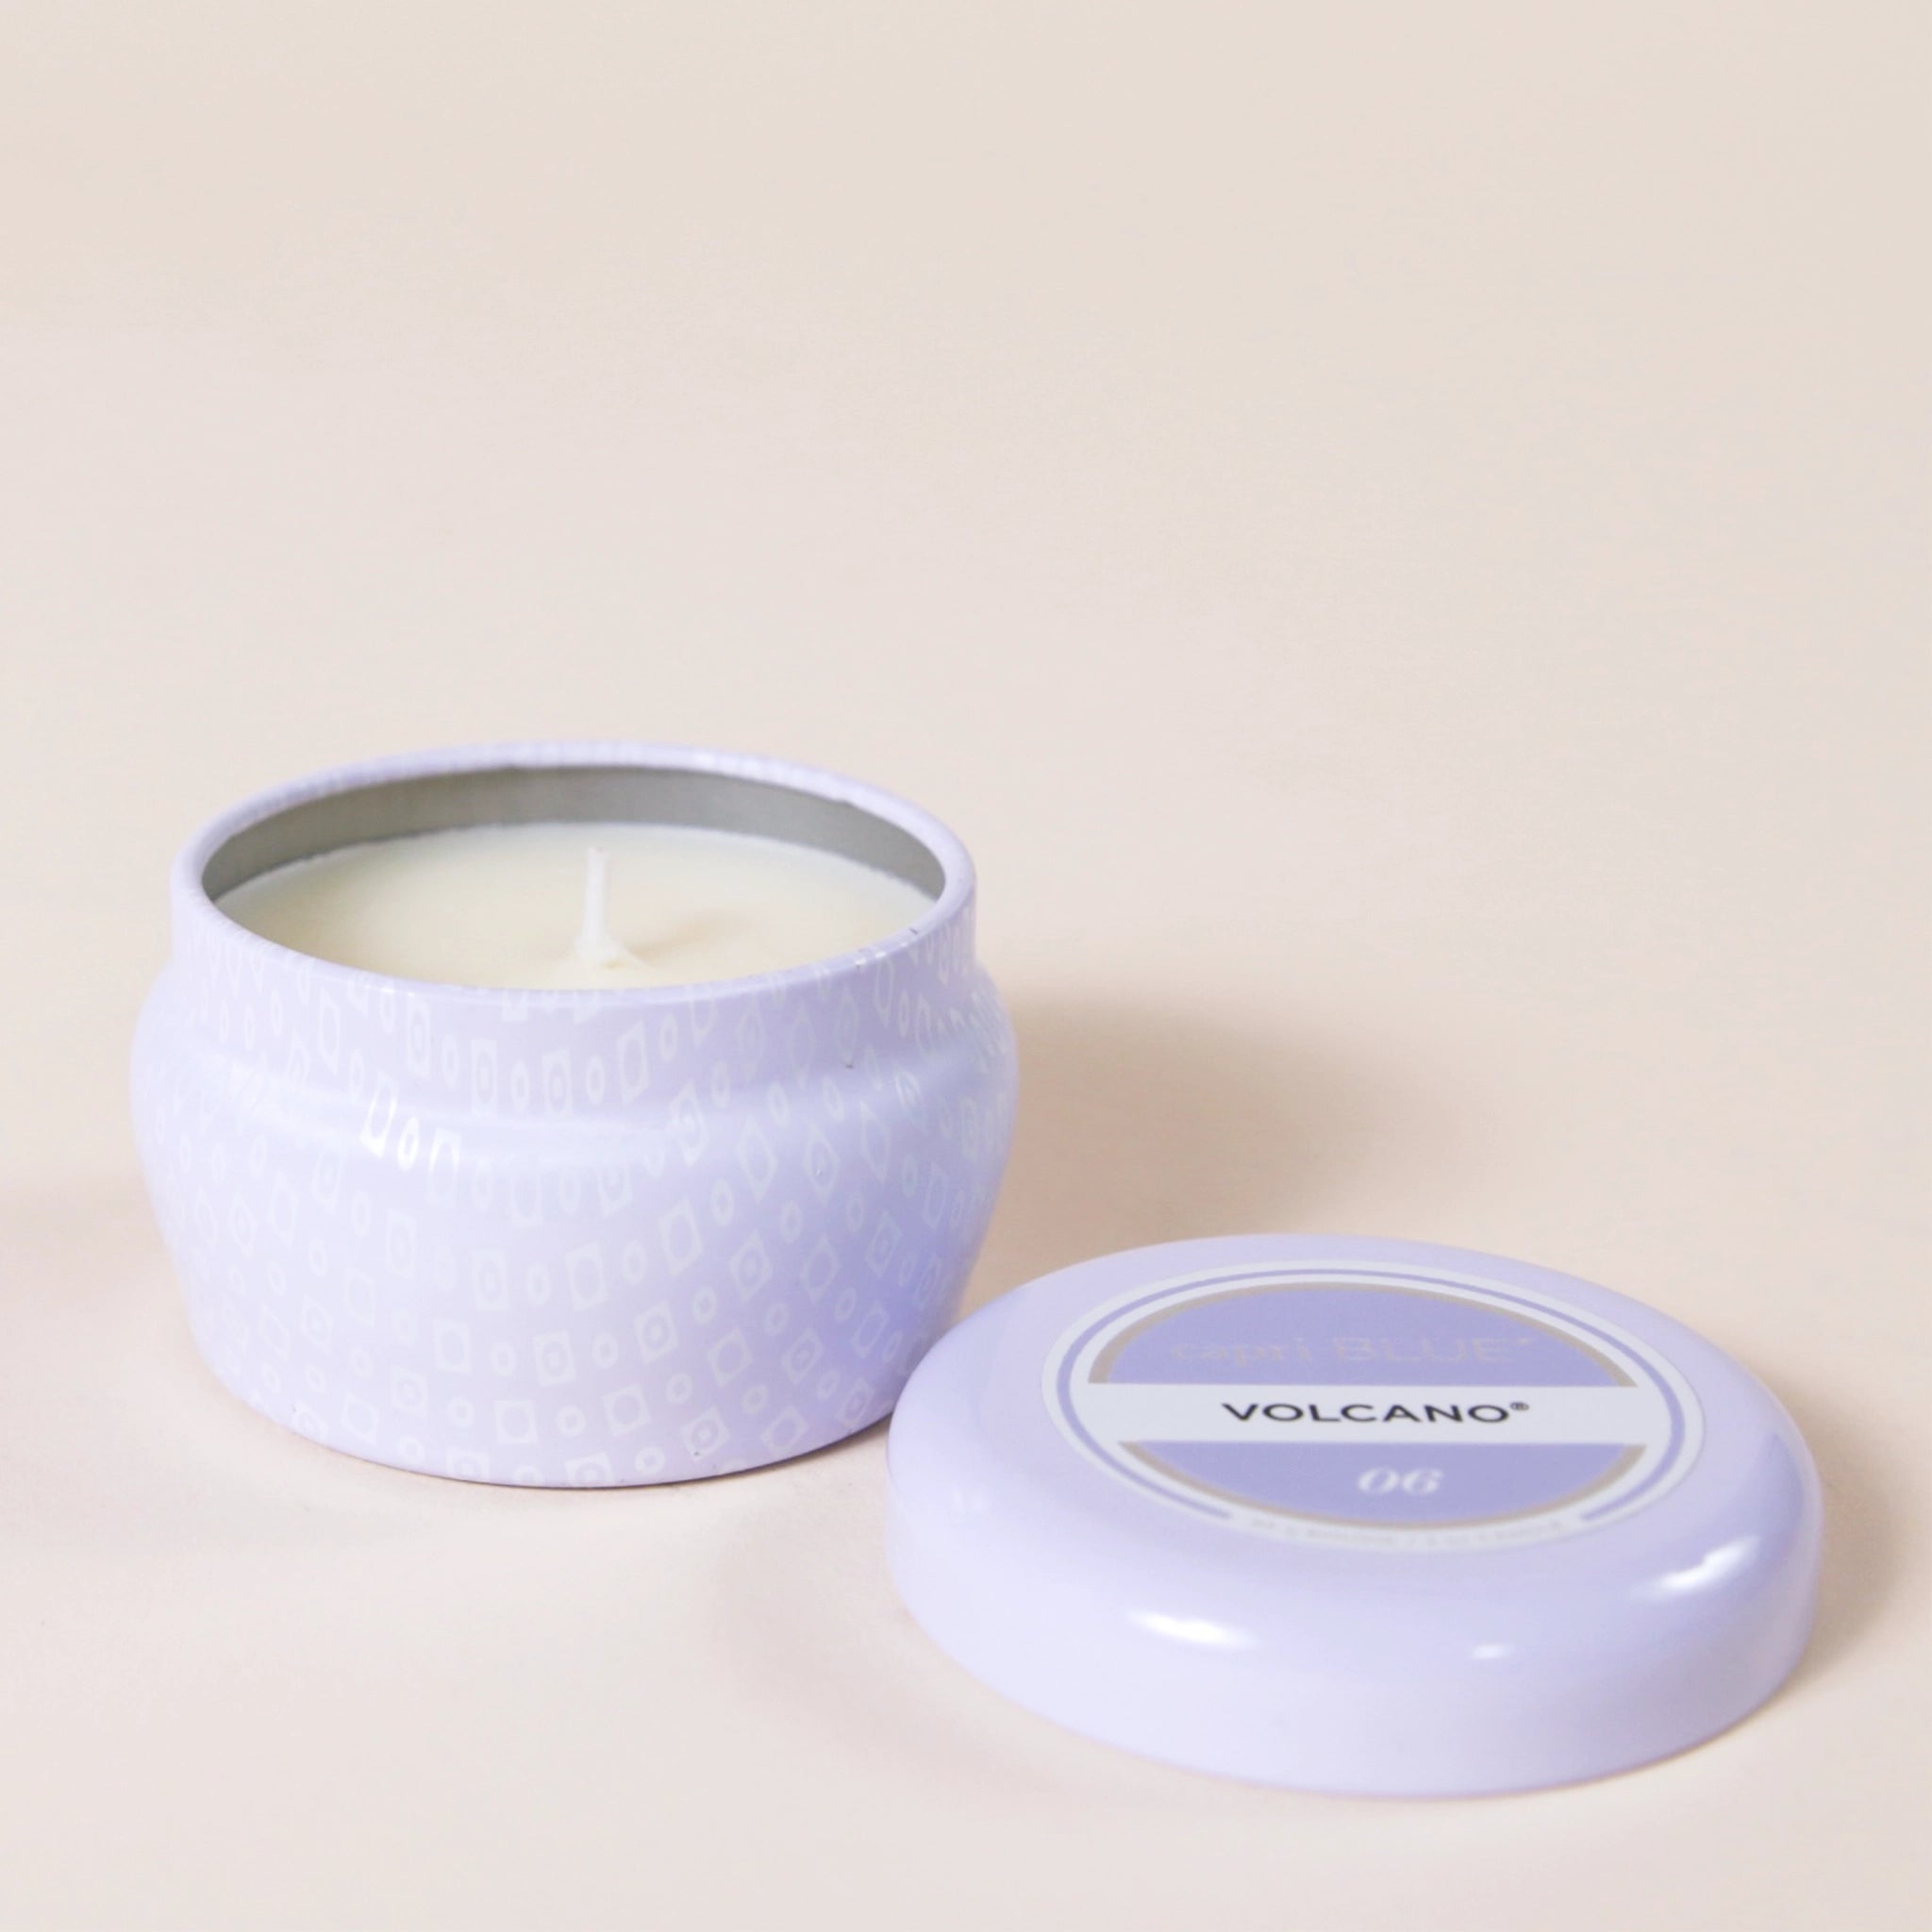 A small lavender tin candle with white wax and a white diamond repeating pattern on the outside of the tin. Comes with a matching purple lid that reads, &quot;Capri Blue Volcano&quot;.